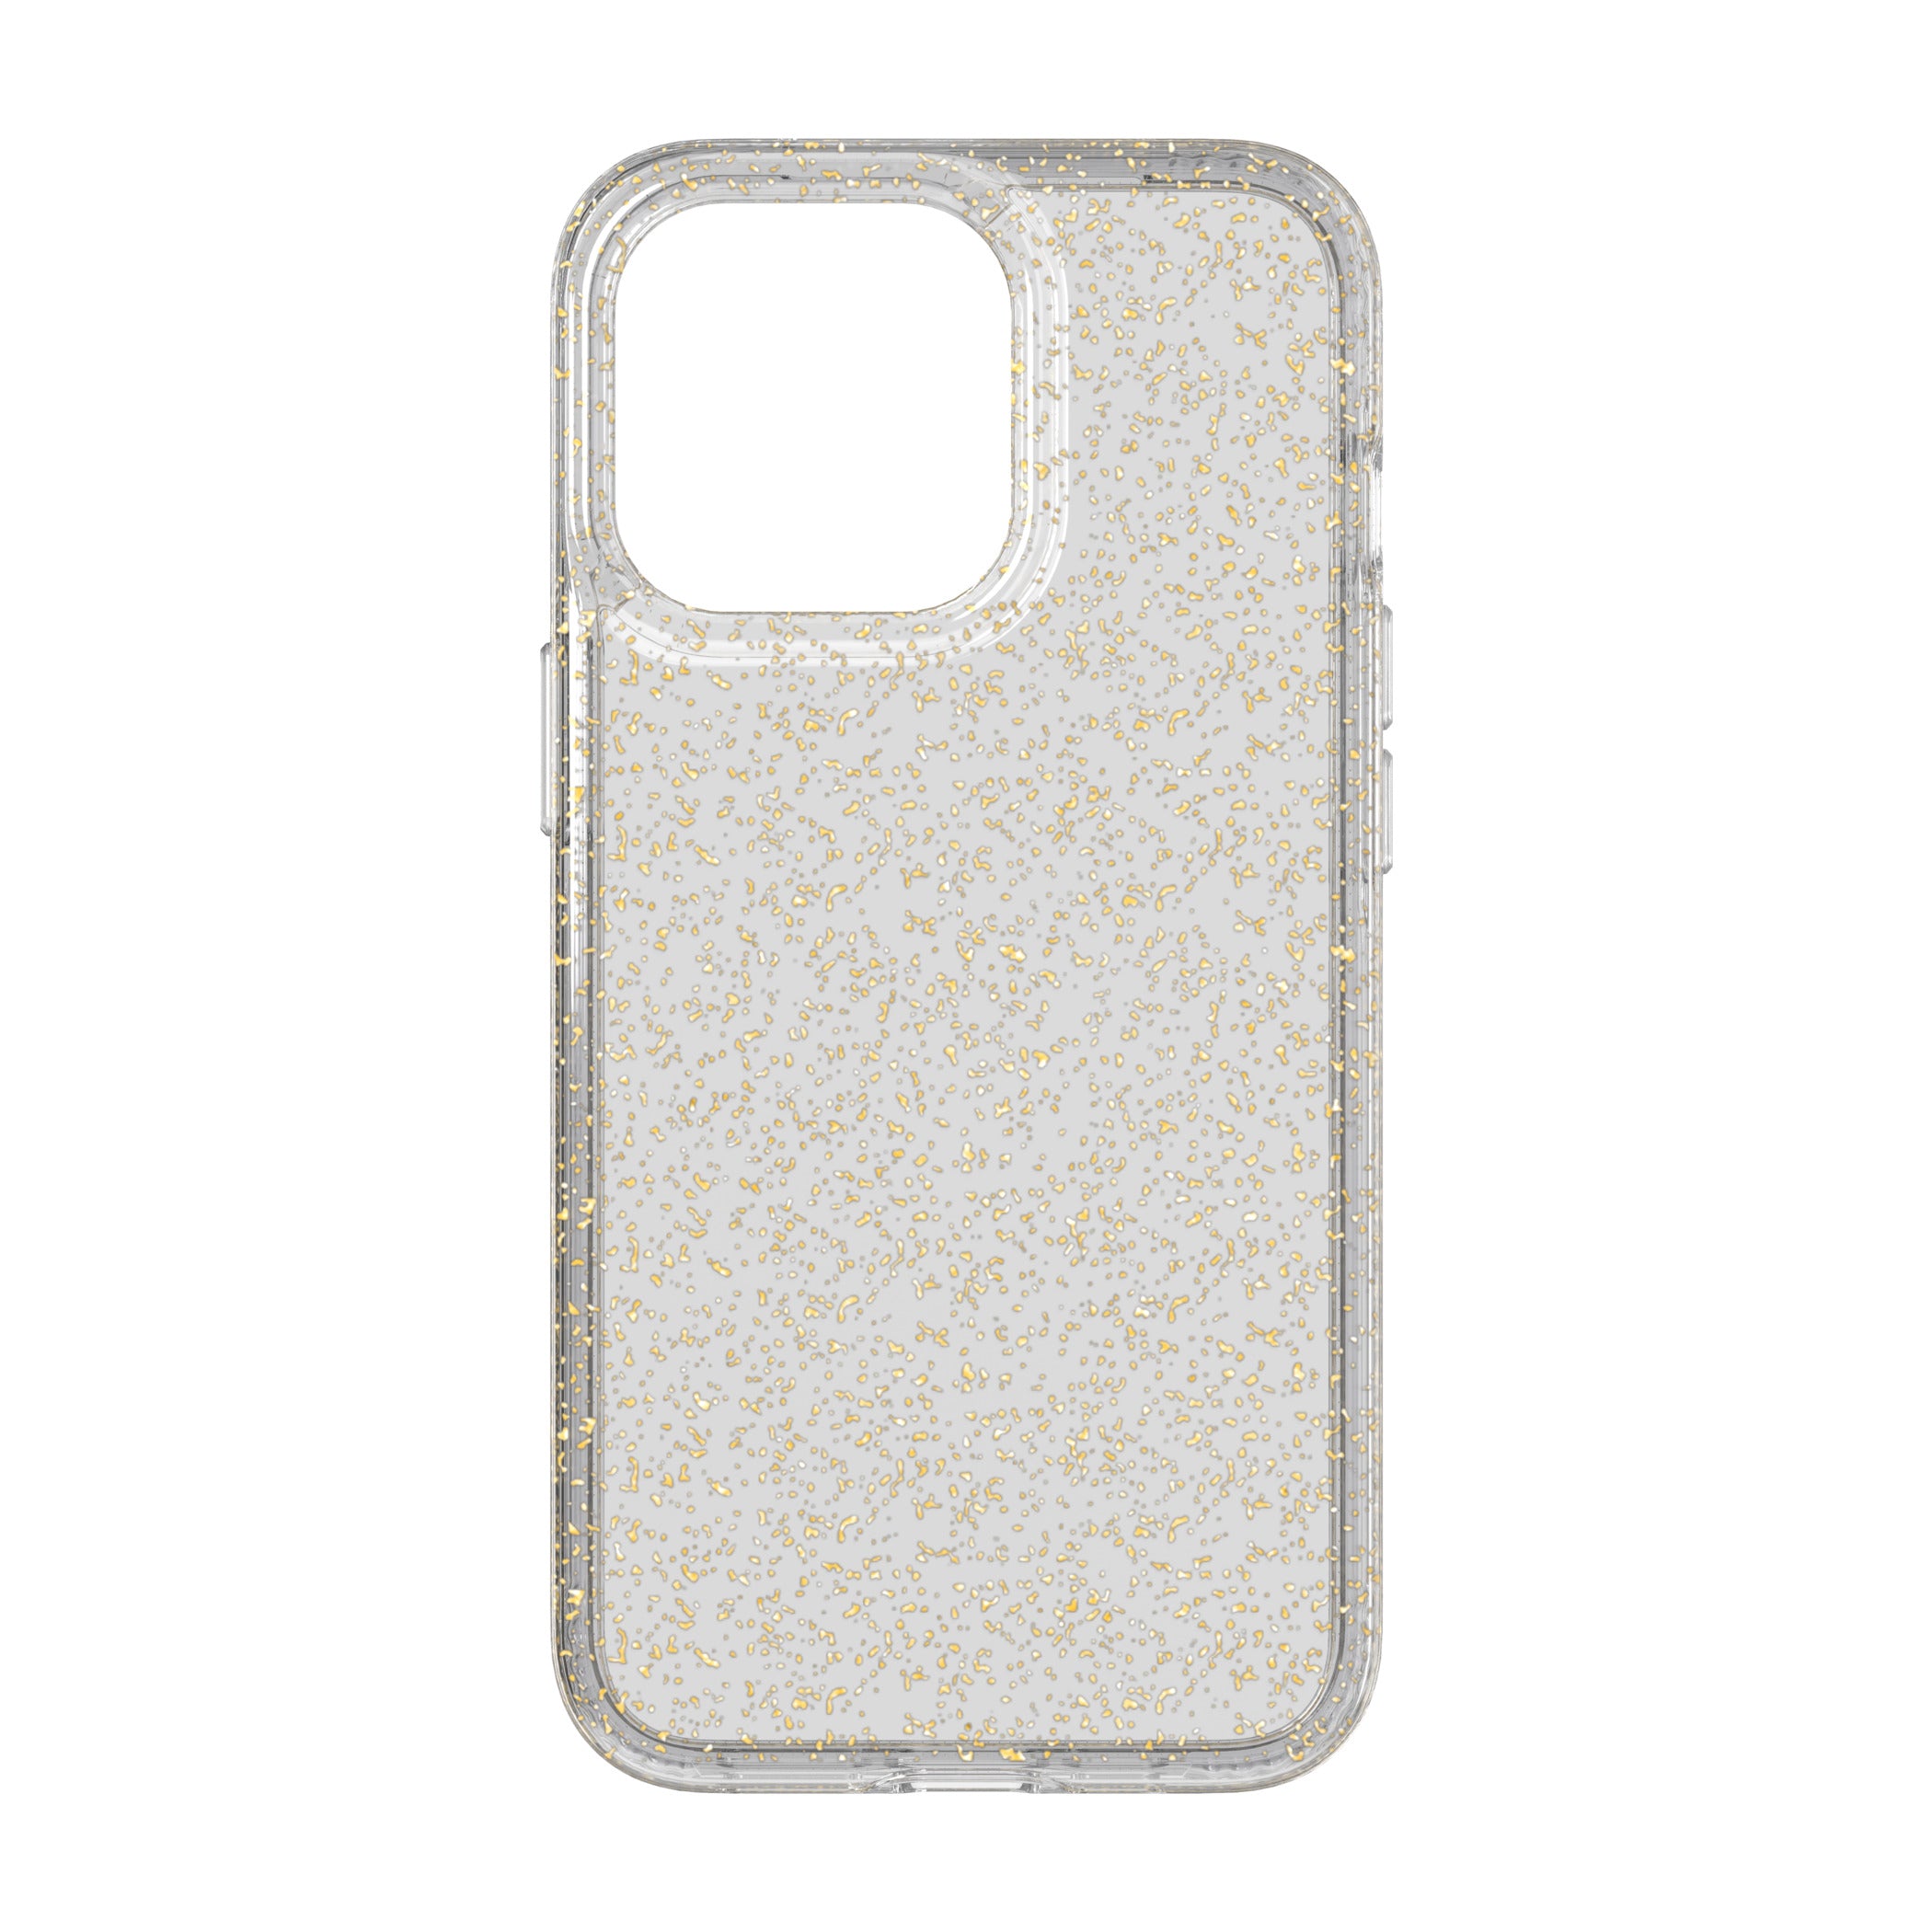 Tech21 Evo Sparkle Phone Case for iPhone 13 Pro - Iridescent.